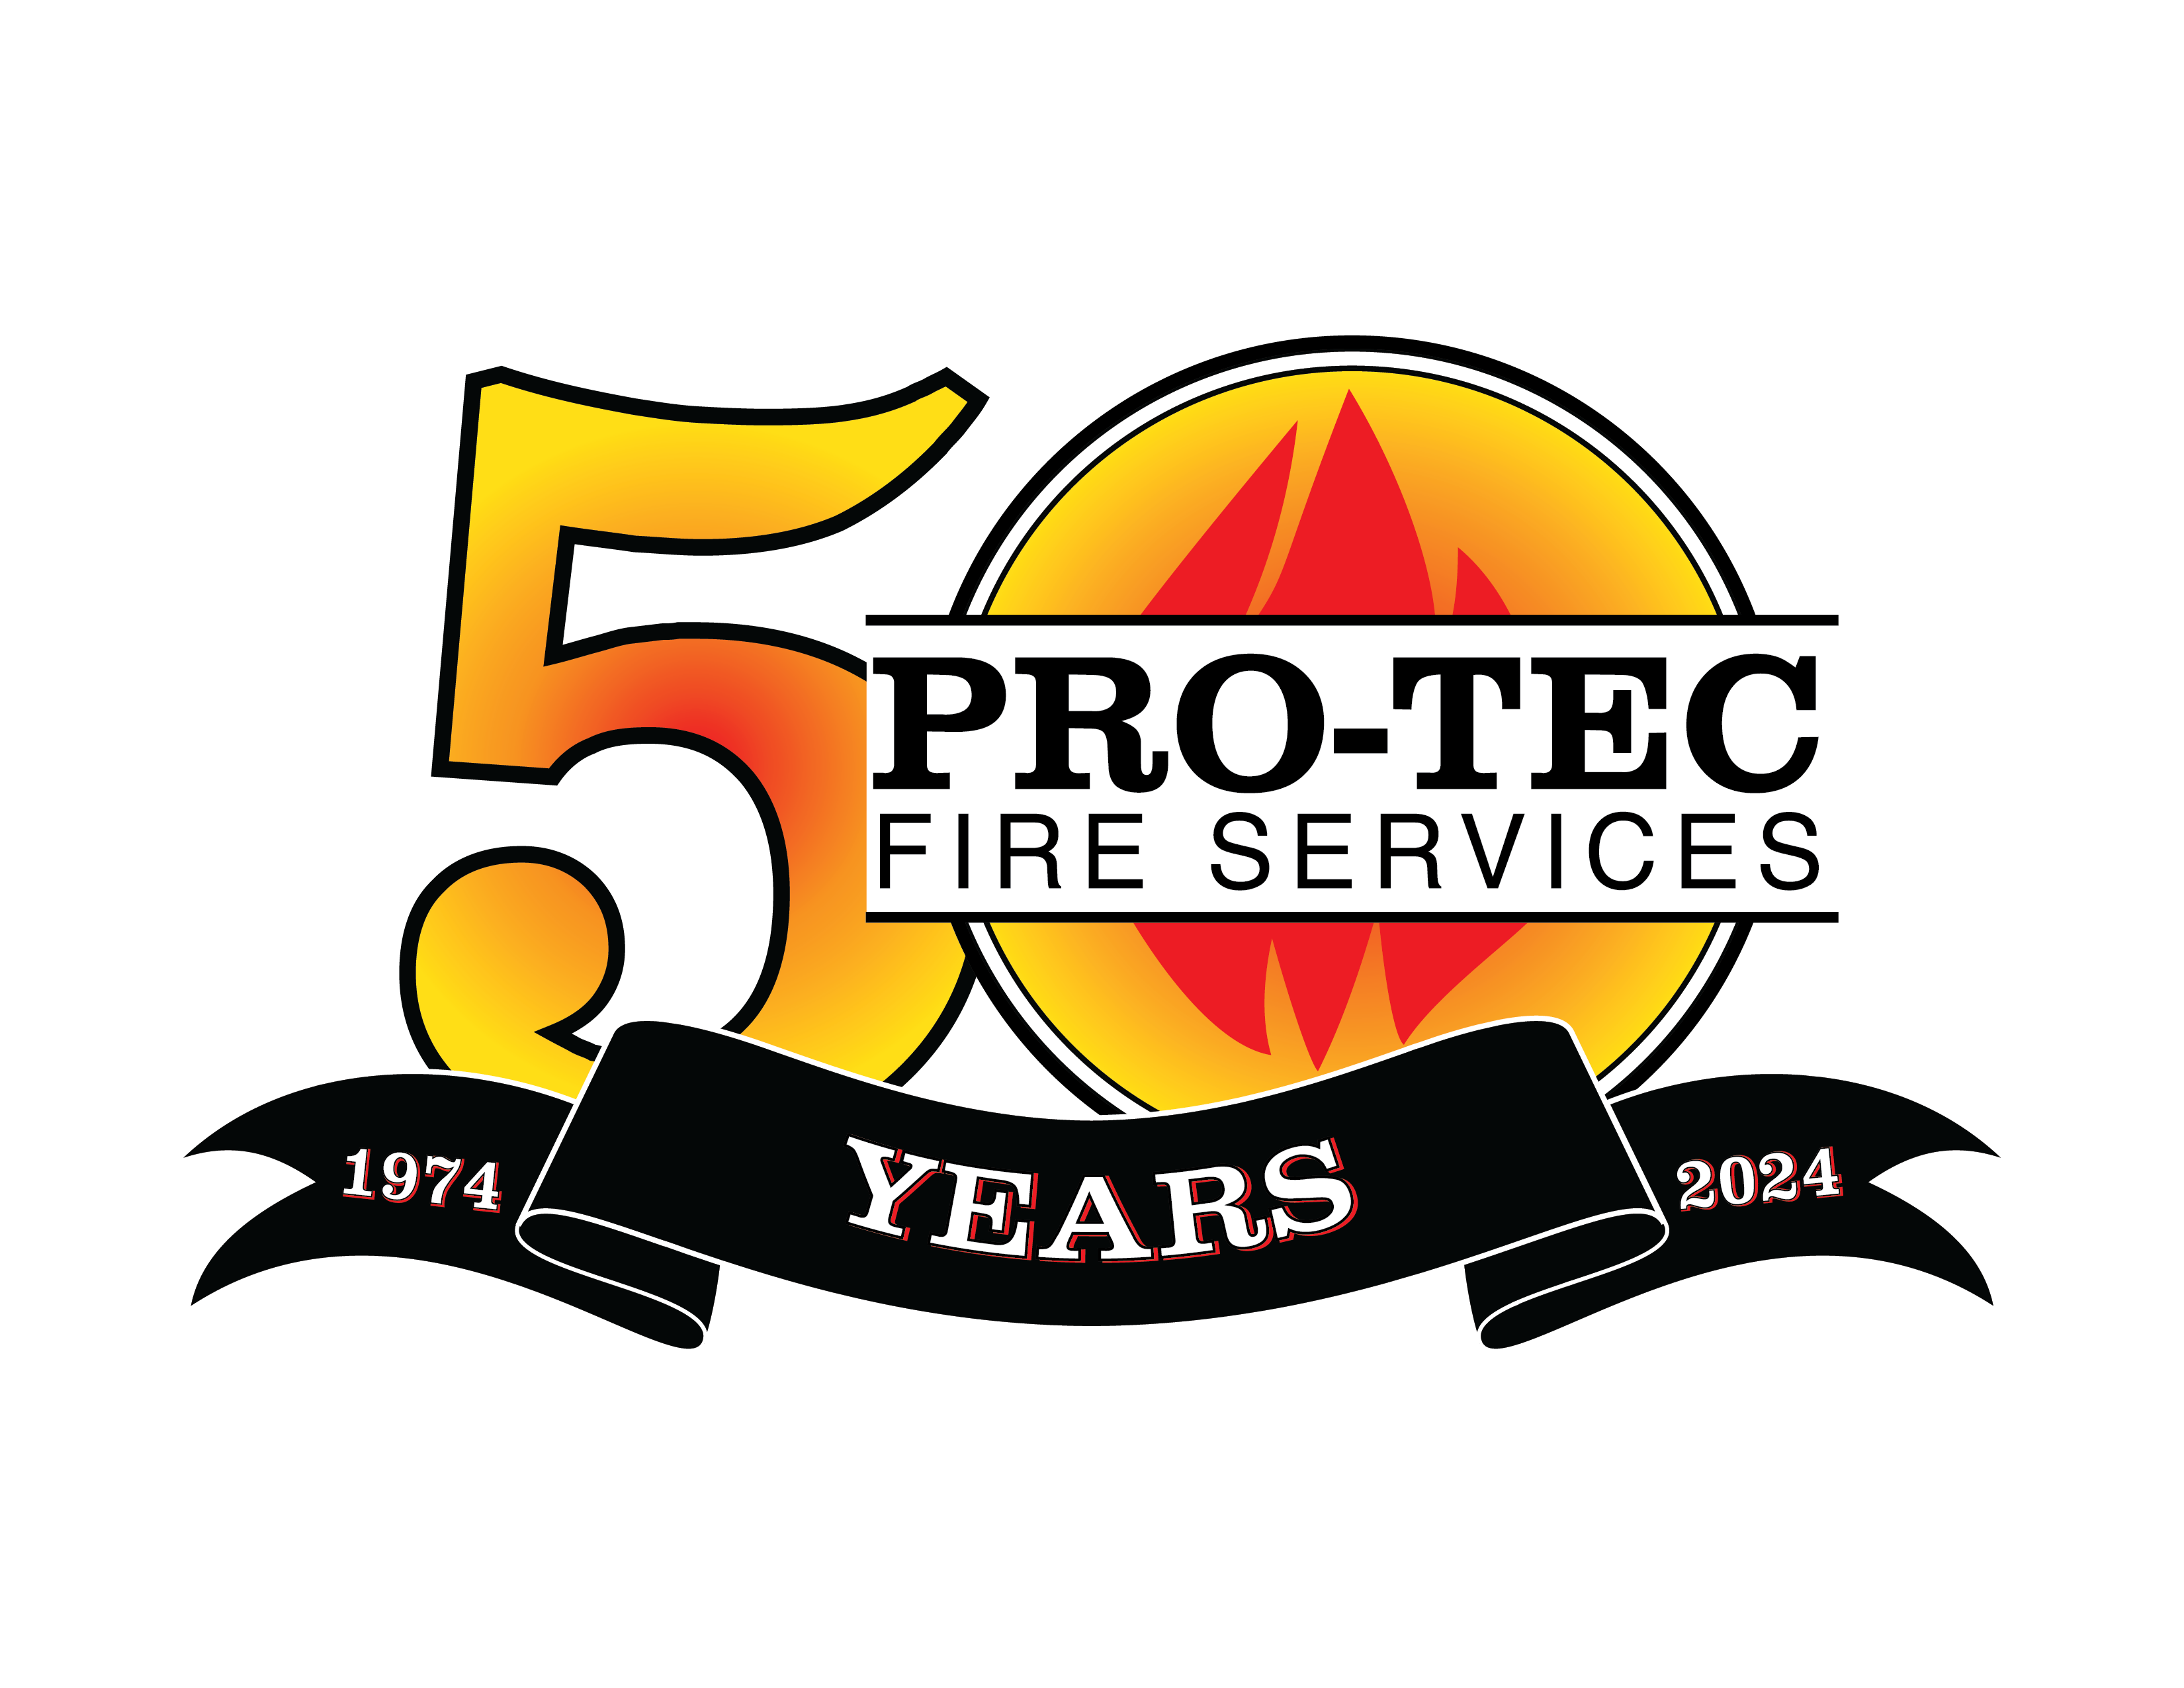 Pioneers of Contracted ARFF Services - Pro-Tec Fire Services